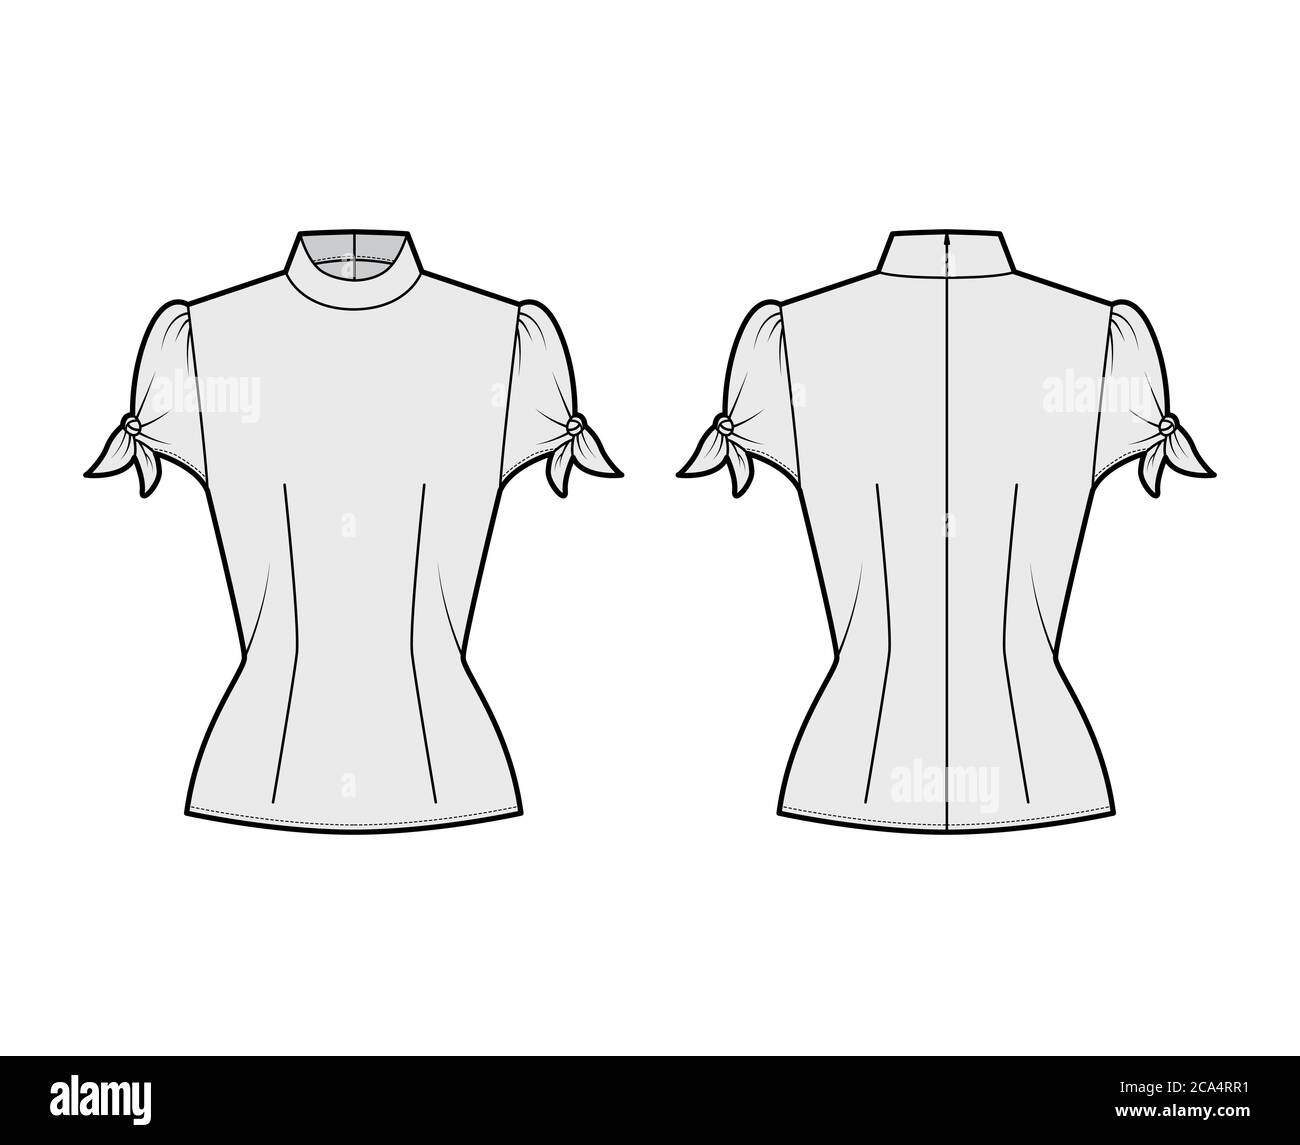 Knotted cutout blouse technical fashion illustration with high neckline, puffed volume sleeves, back zip fastening. Flat apparel template front, back grey color. Women men unisex garment CAD mockup Stock Vector